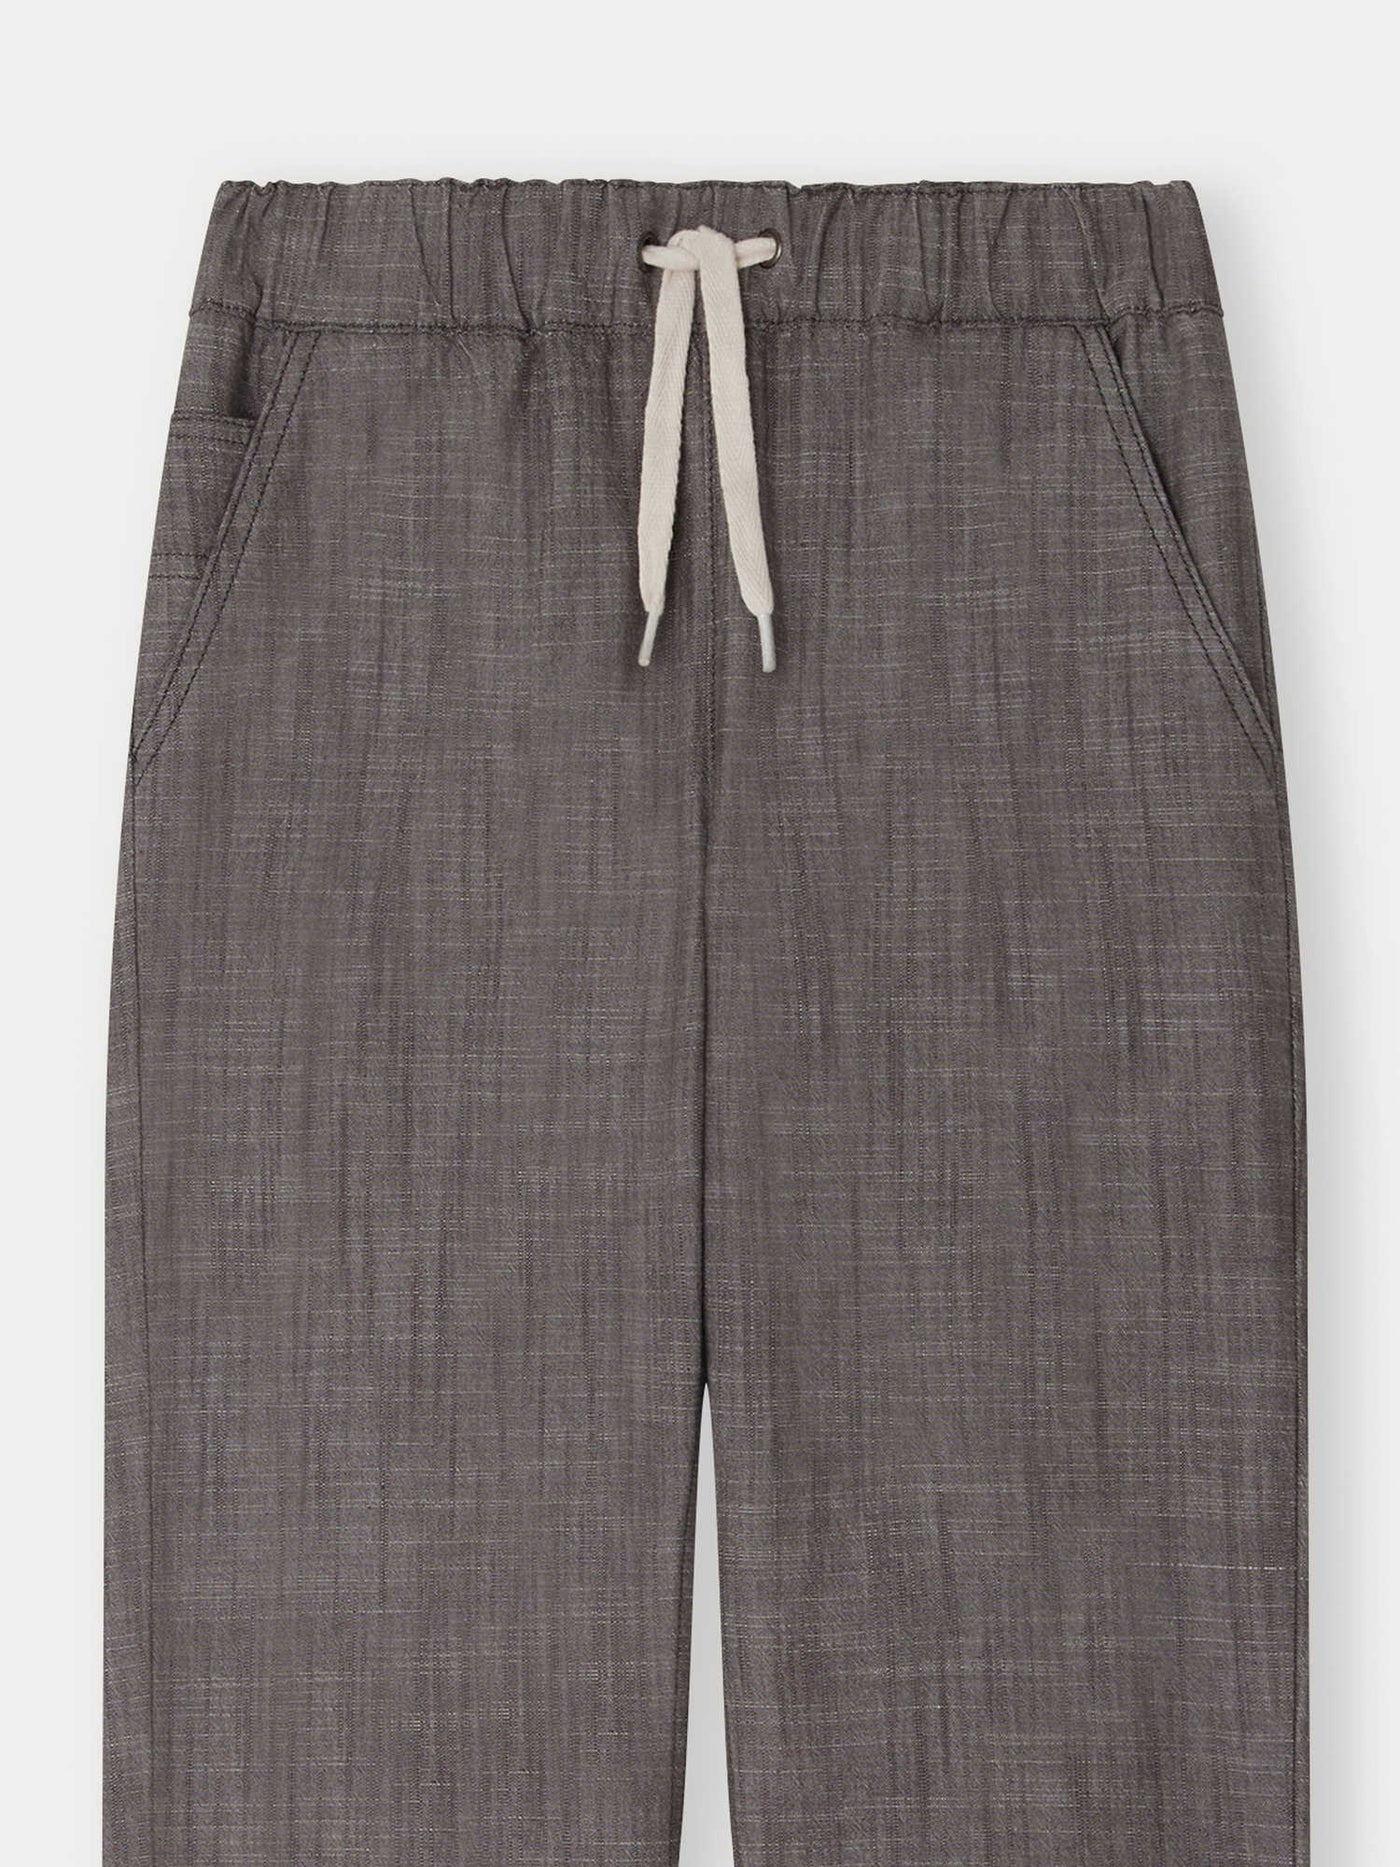 Connell Pants slate gray